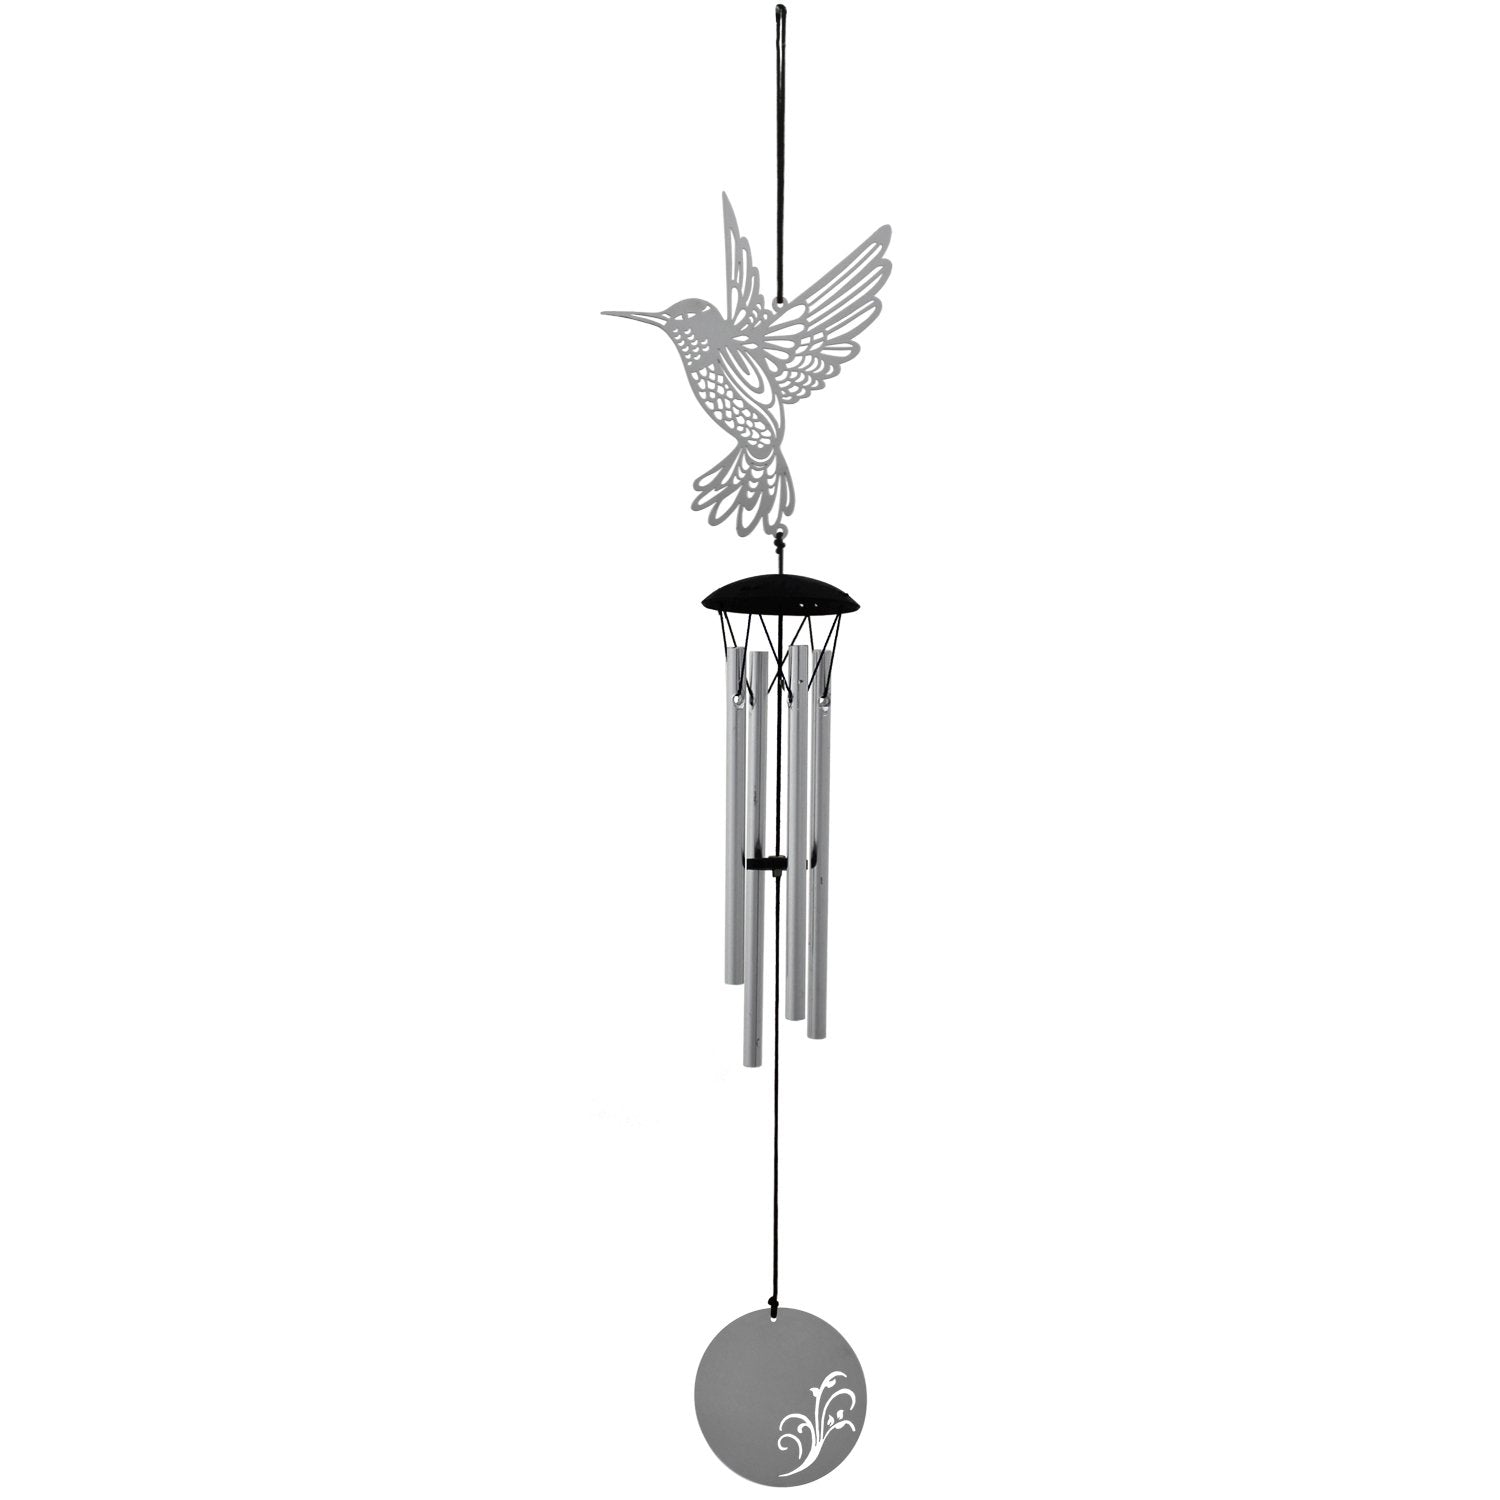 Woodstock Wind Chimes Signature Collection, Woodstock Flourish Chime, 18'' Hummingbird Silver Wind Chime FLHU - image 1 of 6